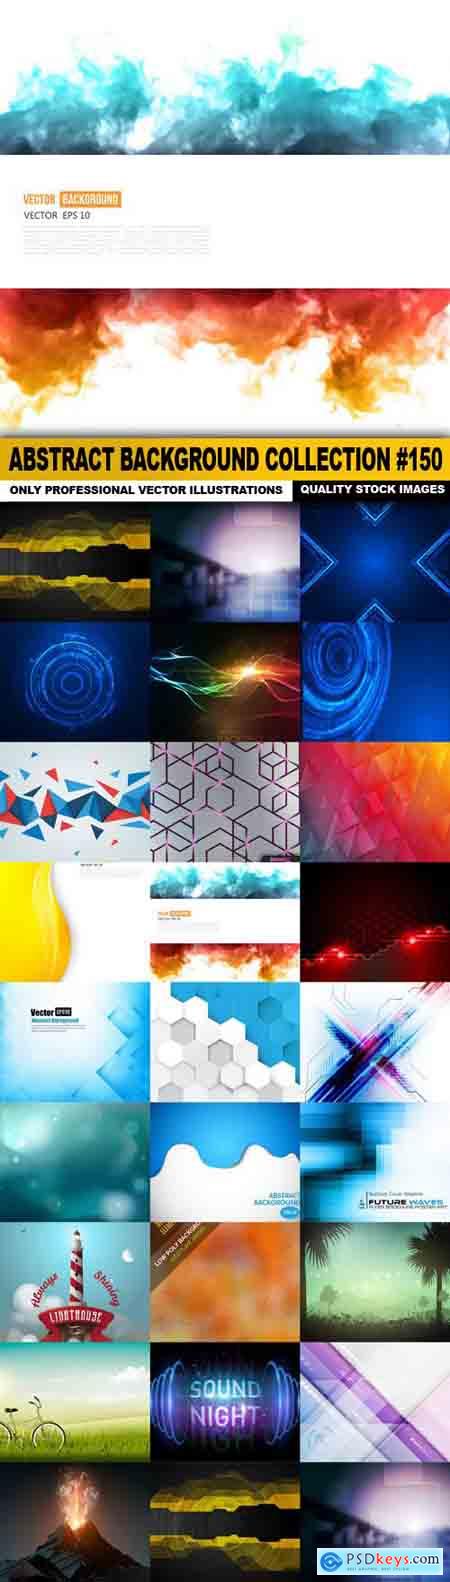 Abstract Background Collection #150 - 25 Vector